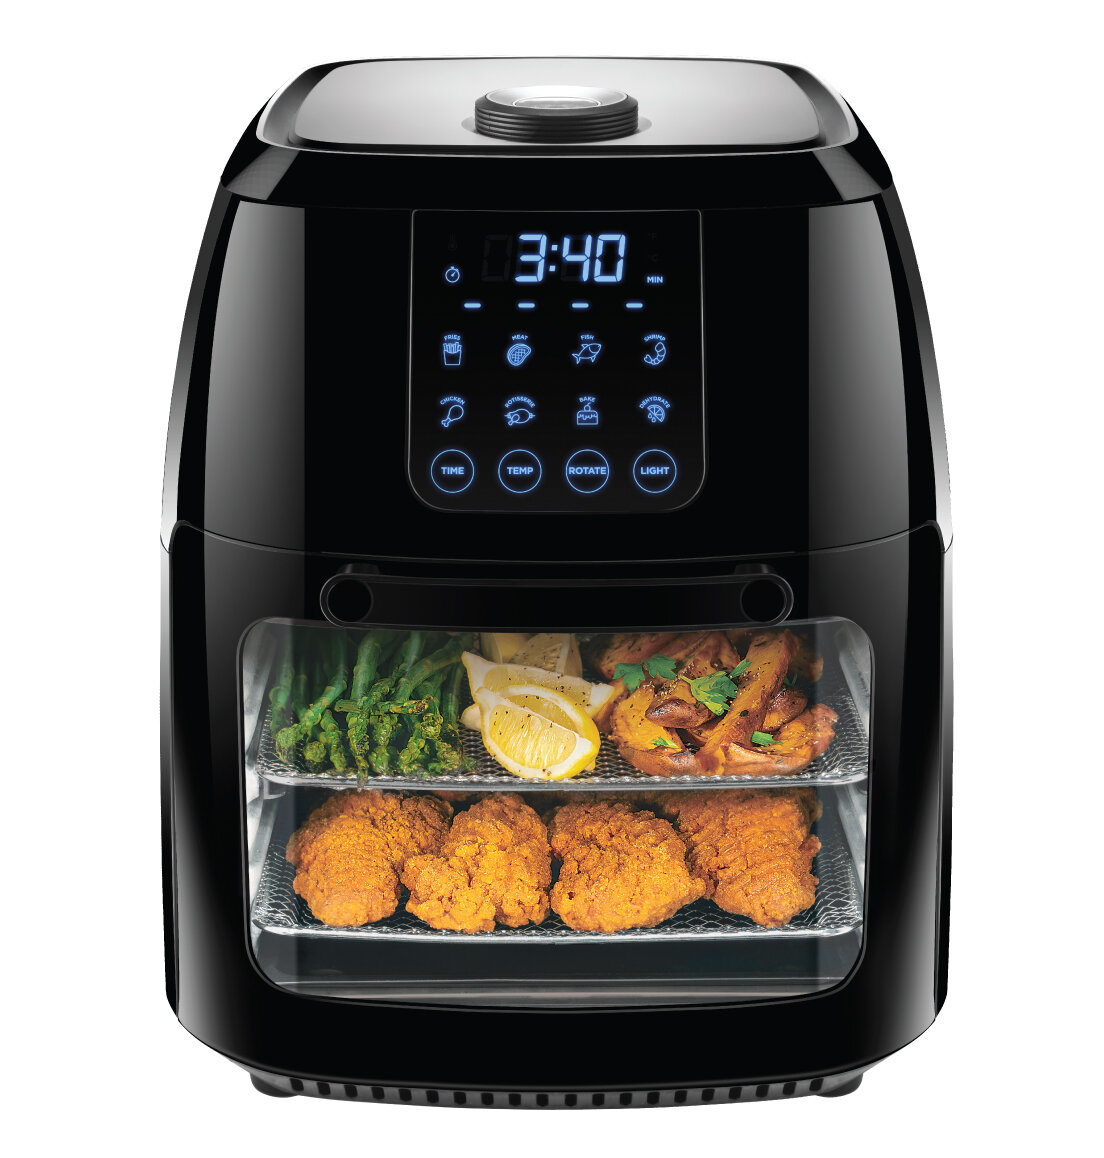 Chefman Toaster Oven Air Fryer Cookbook All About Image HD